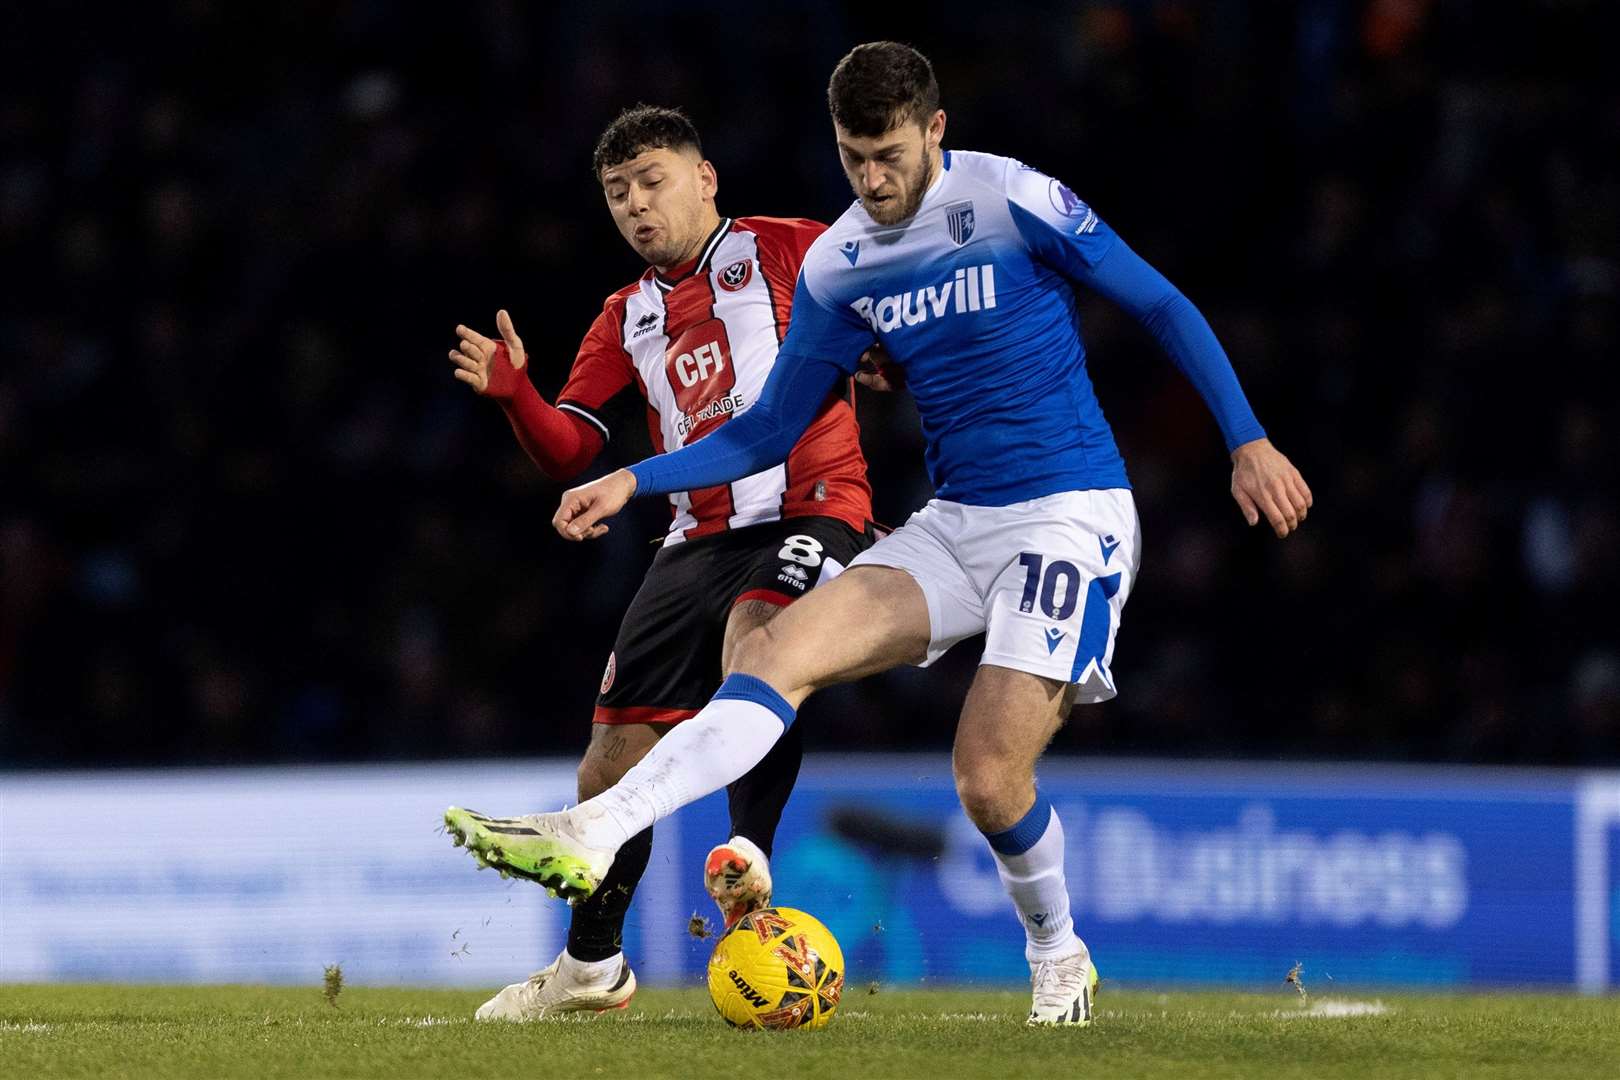 Gillingham striker Ashley Nadesan fends off a challenge in their FA Cup game against Sheffield United last weekend Picture: @Julian_KPI